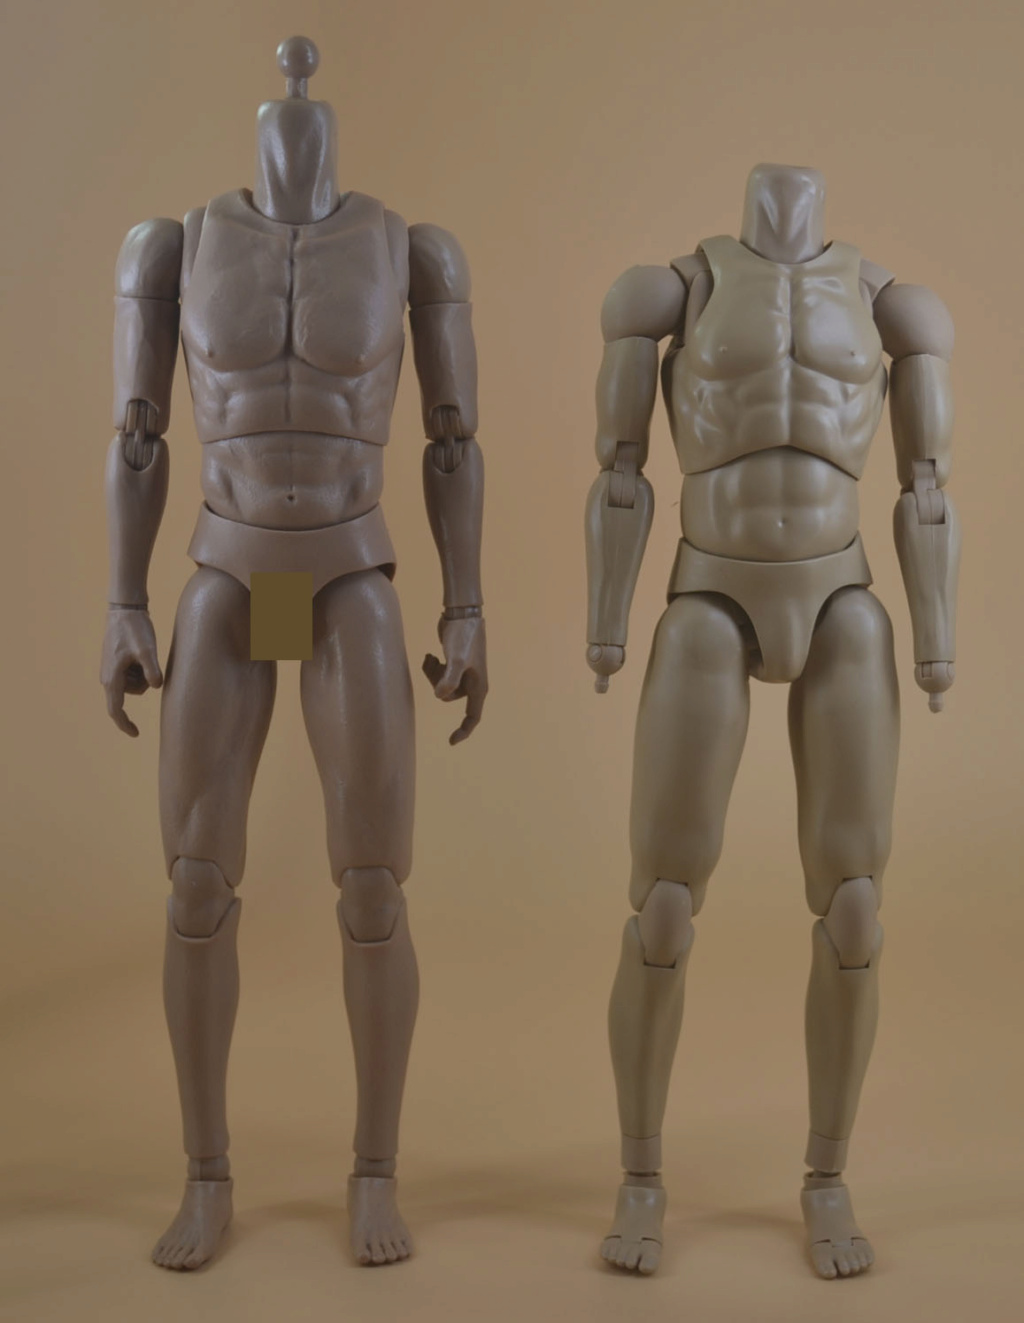 Coomodel - NEW PRODUCT: COOMODEL: 1/6 MB001 standard male body, MB002 tall male body, MB003 muscle male body, MB004 tall muscle body _dsc3737